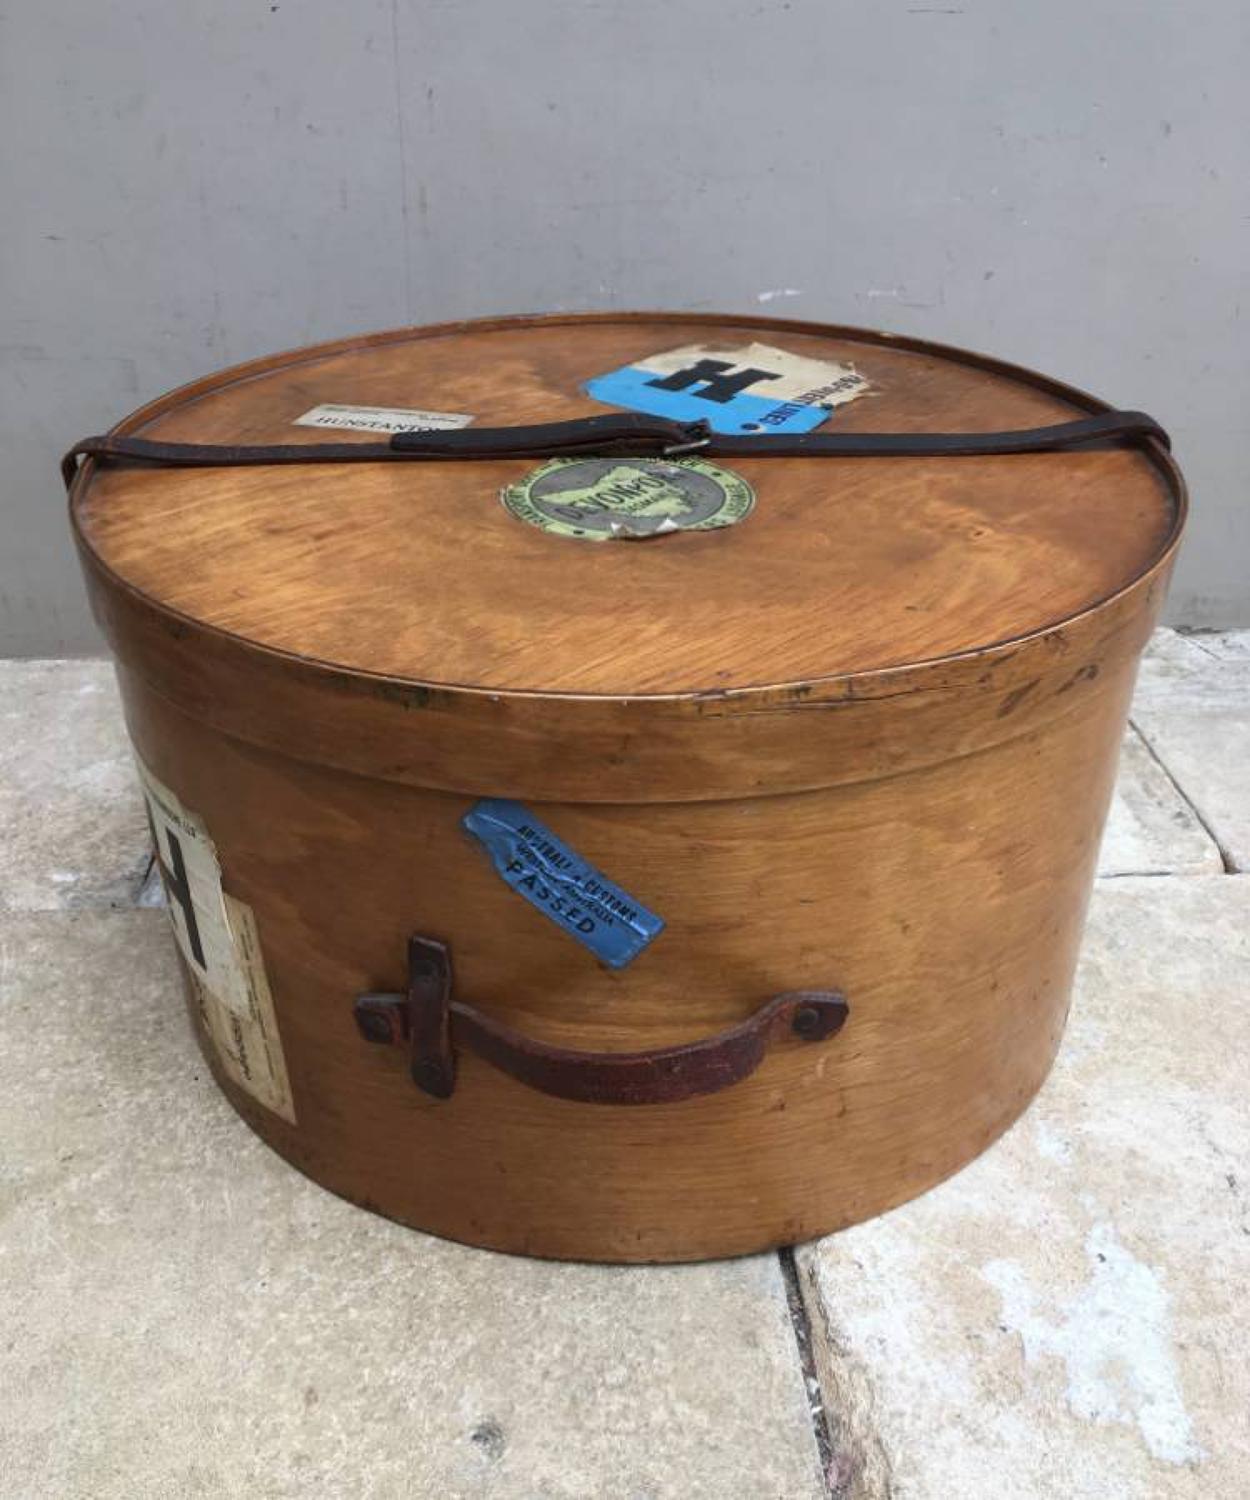 Superb Condition Early 20th Century Travelling Hat Box